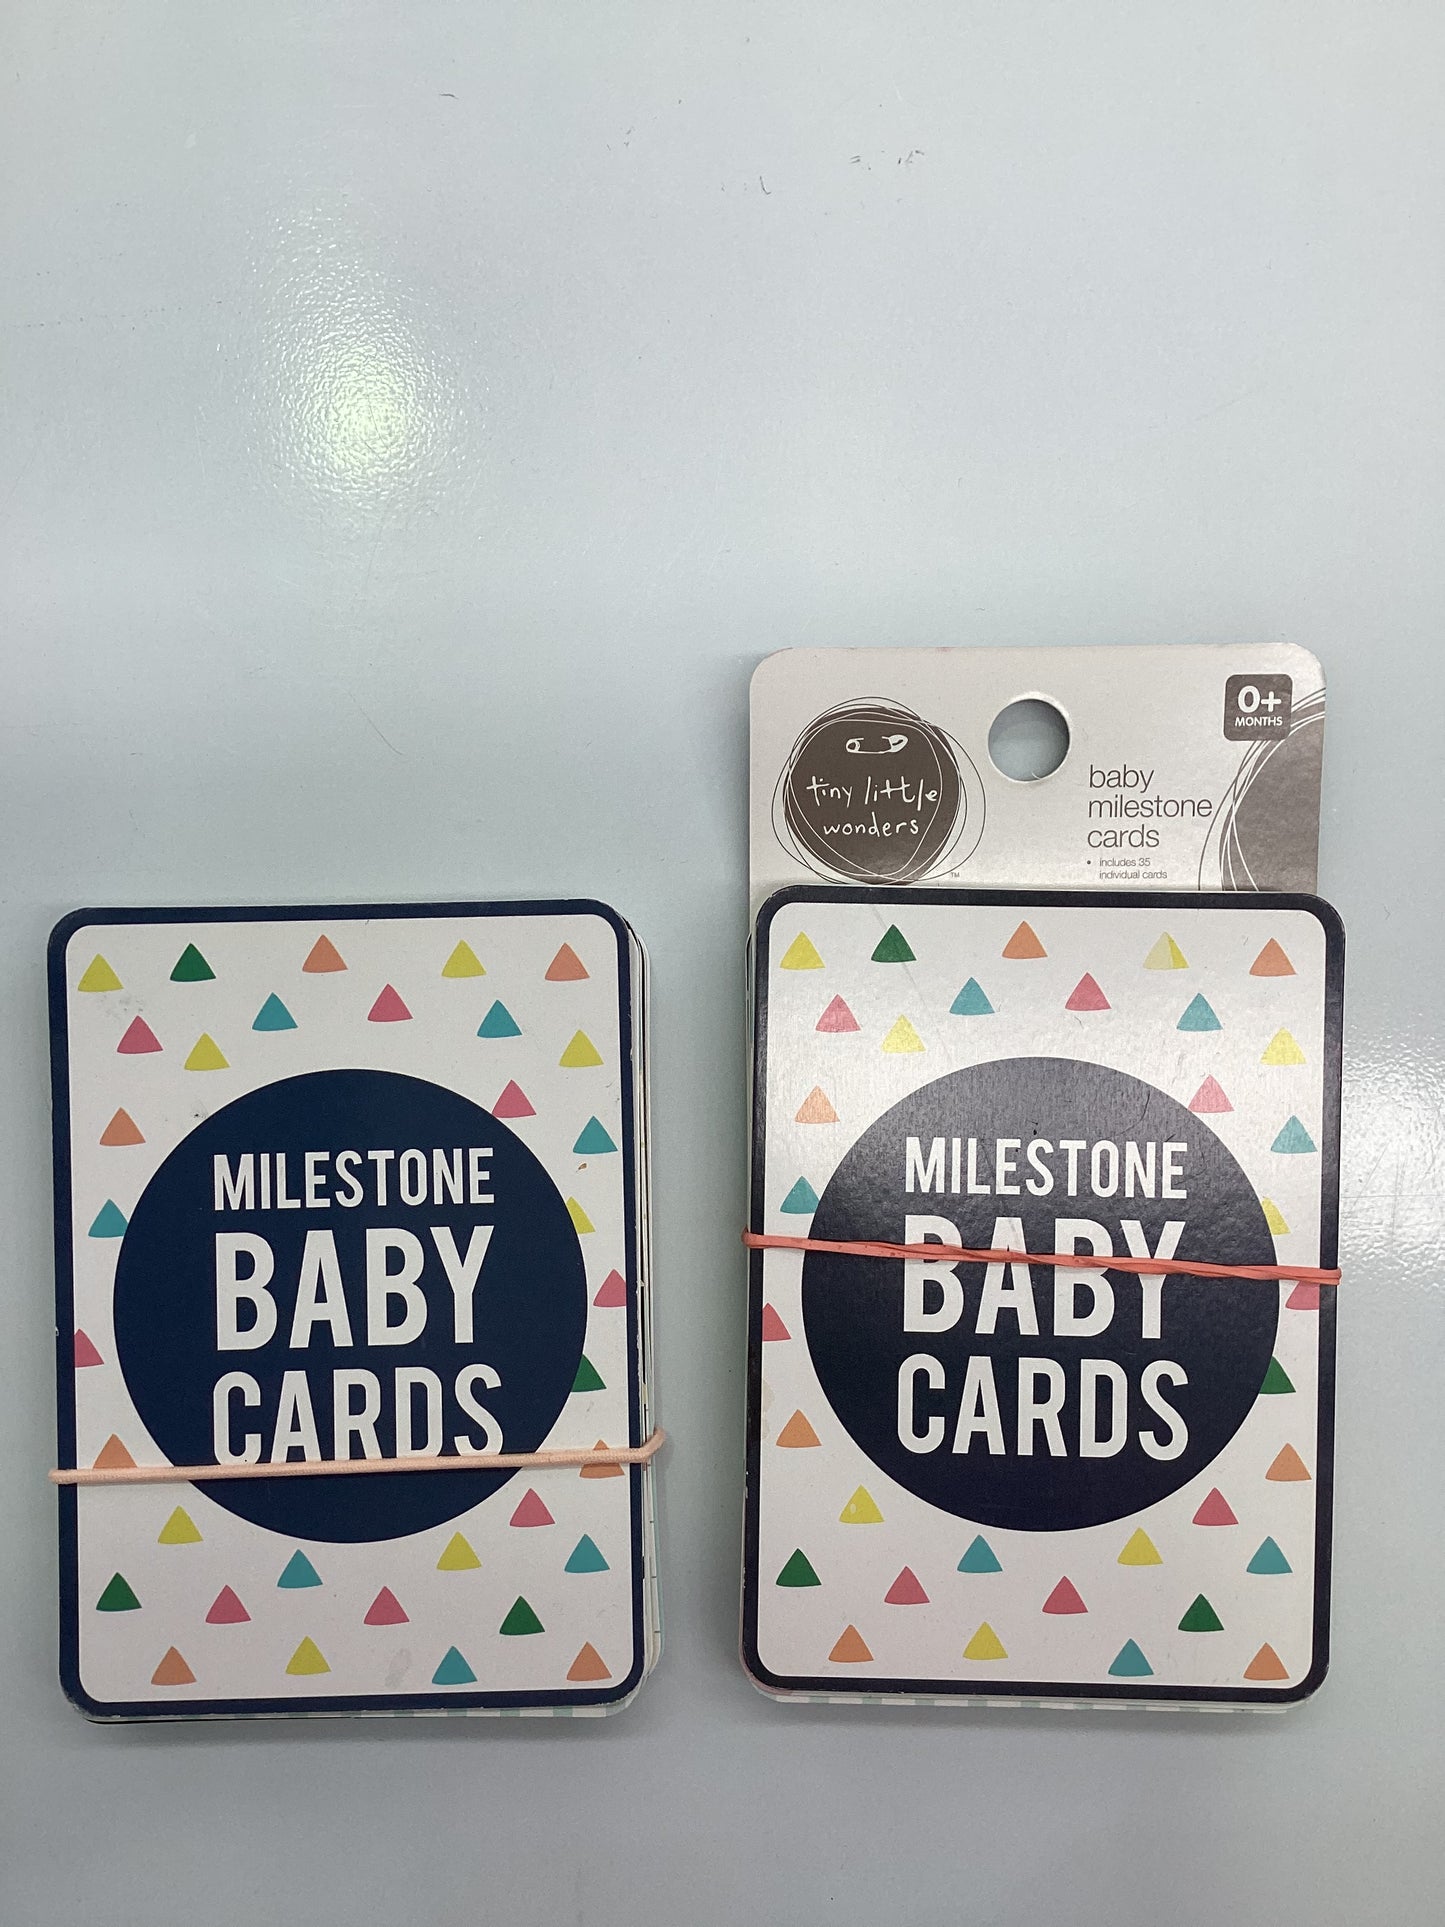 Baby Milestone Cards by Tiny Little Wonders